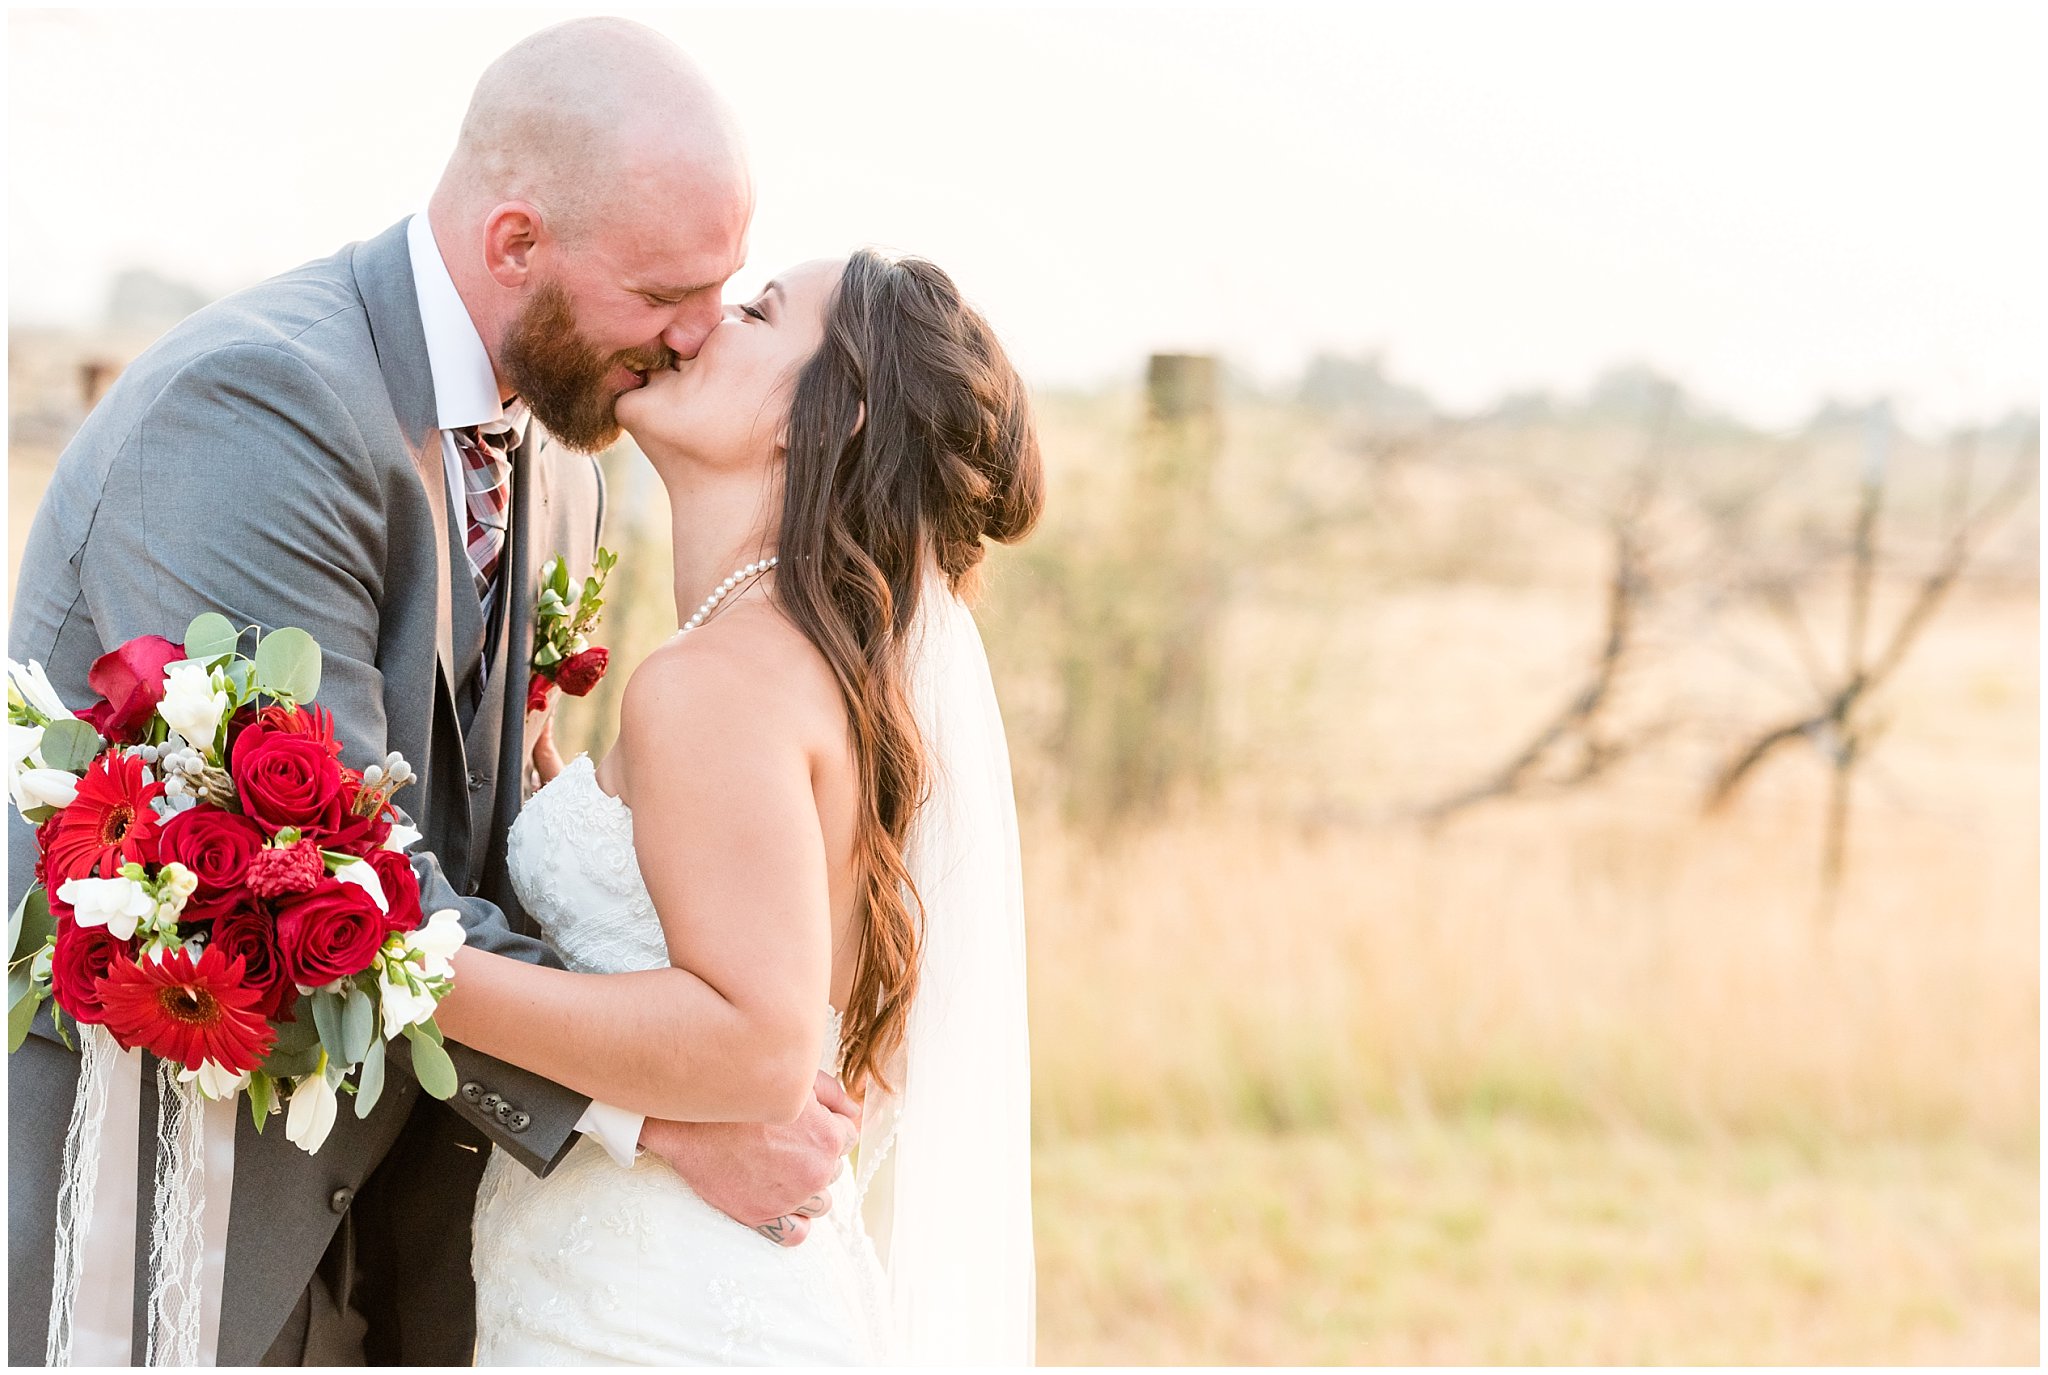 Bride and groom giggle kiss during sunset portraits | Red and Grey wedding | Davis County Outdoor Wedding | Jessie and Dallin Photography